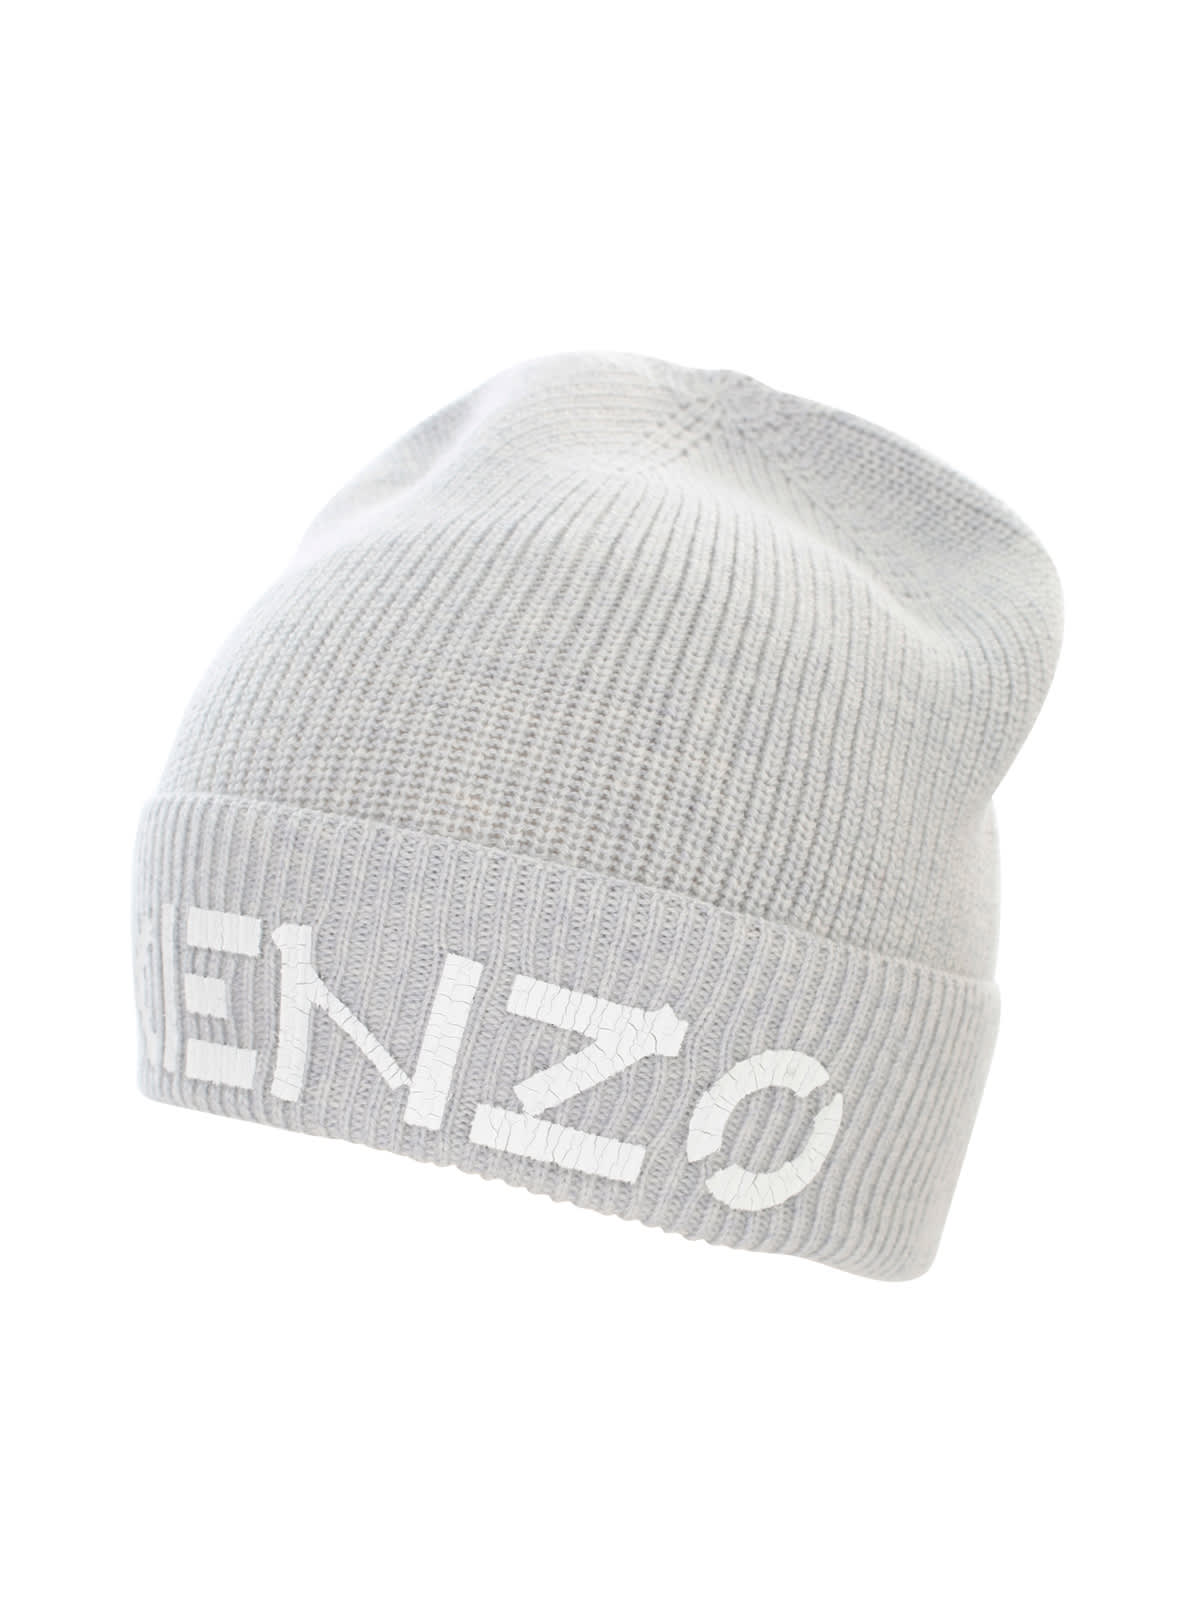 Kenzo Painted Knit Hat